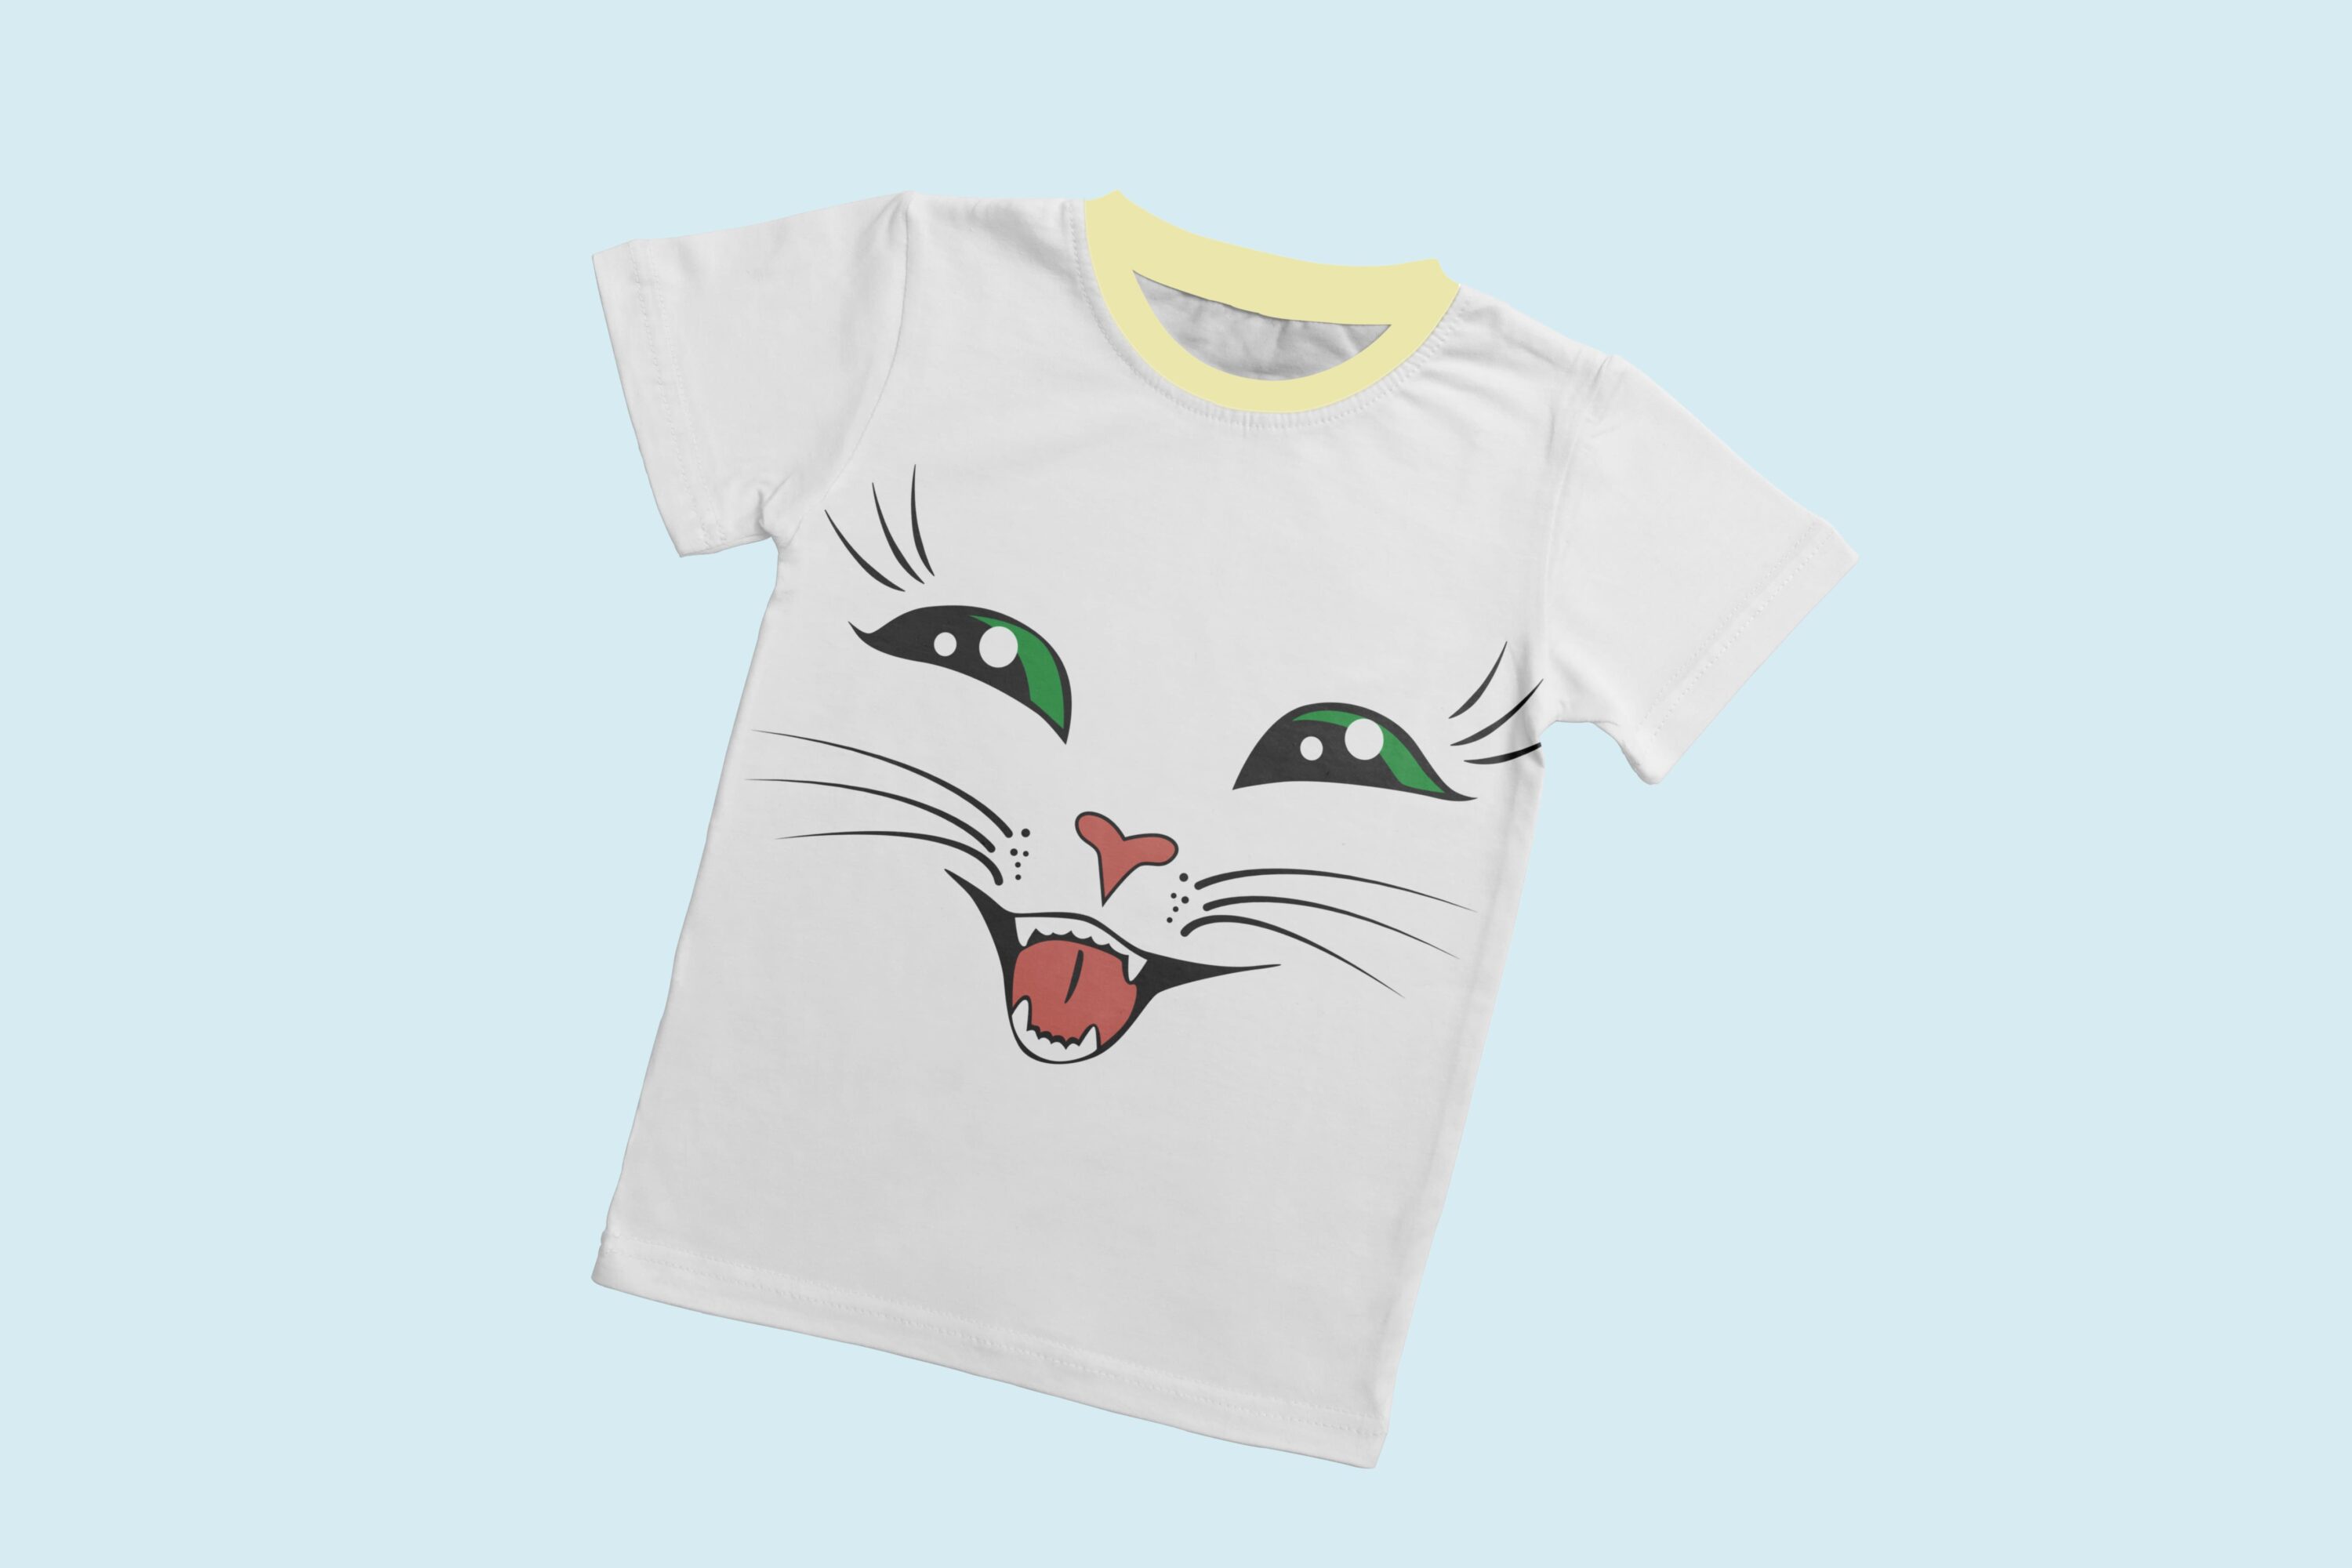 A white t-shirt with a light yellow collar and the face of a laughing cat with green eyes.